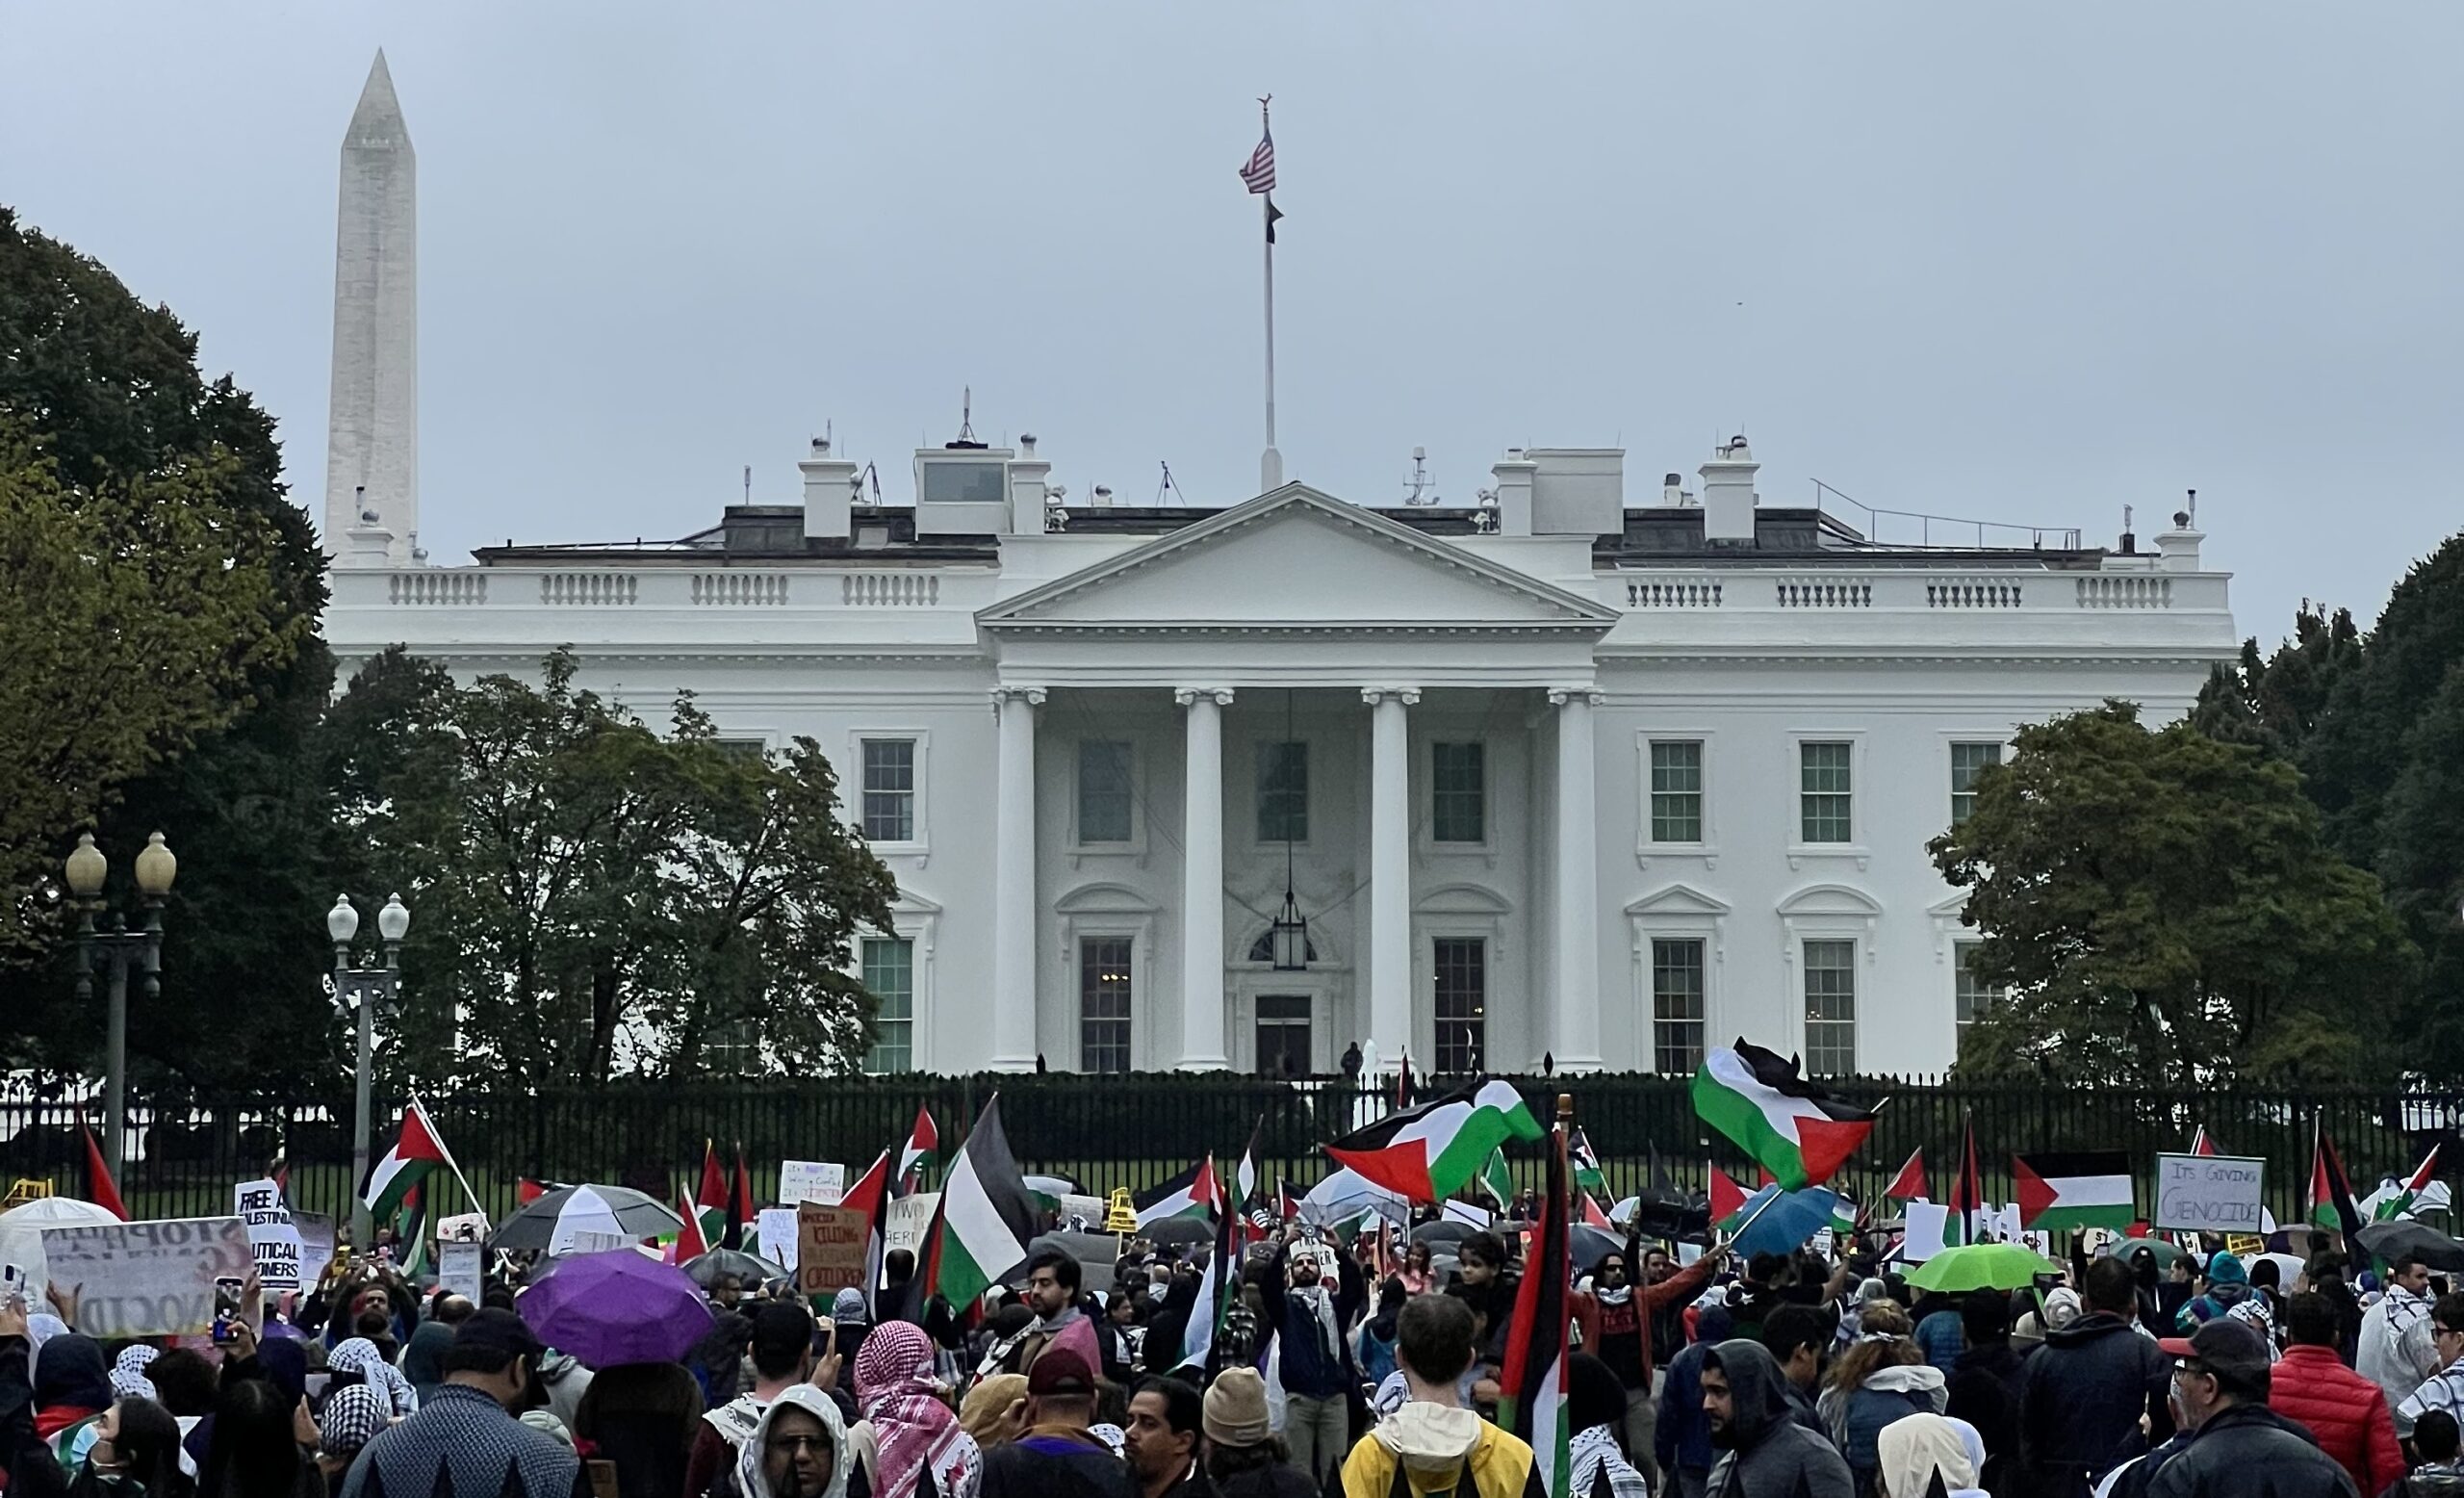 Protesters gathered in front of the White House on October 14 in support of Gaza and Palestinian people / Photo by Fadlullah Firman